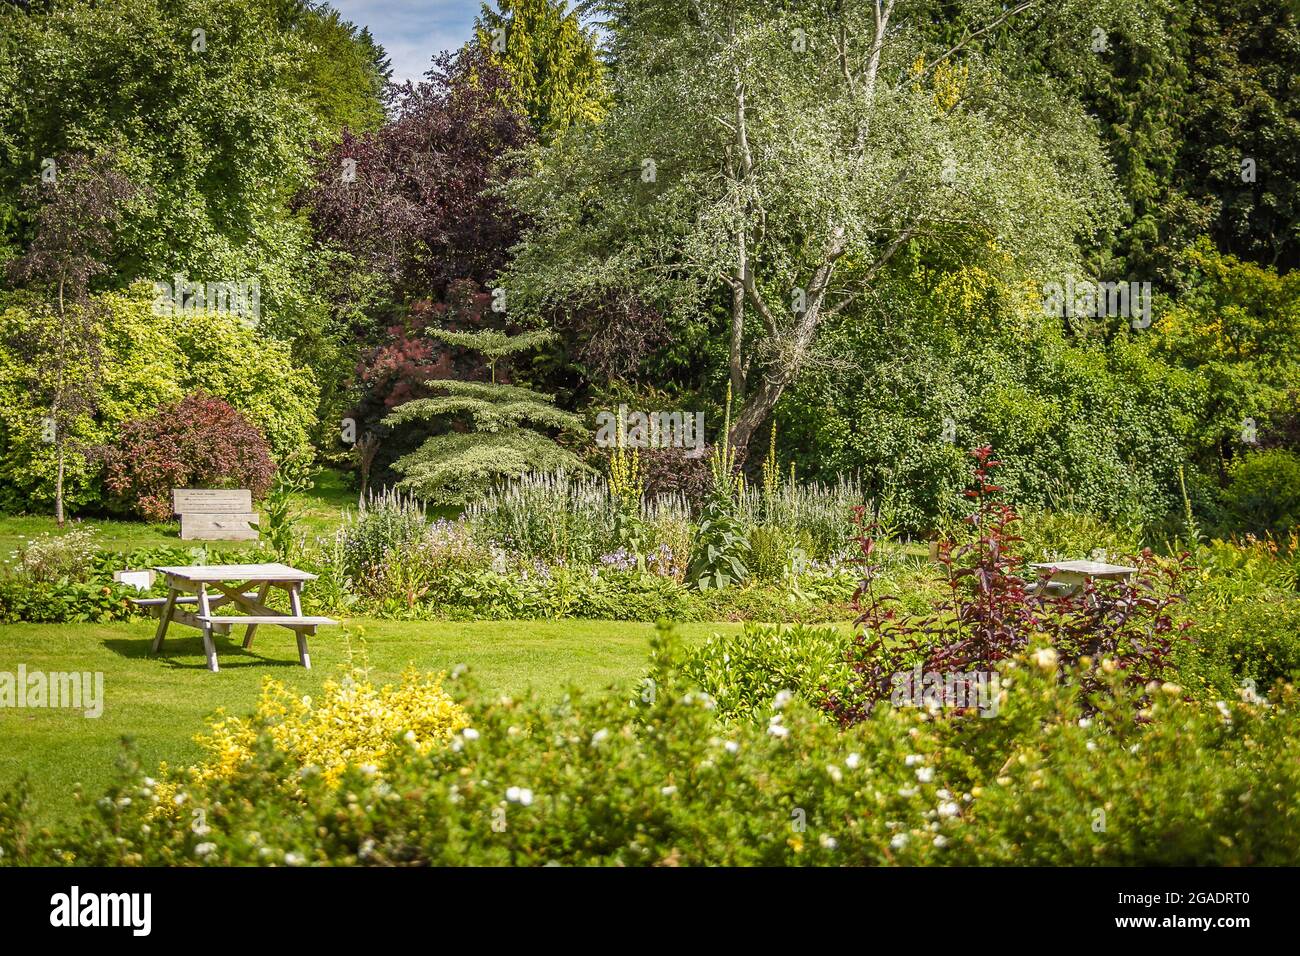 Thorp Perrow, Bedale, Wensleydale, Yorkshire Dales National Park, North Yorkshire, England - Summertime Stock Photo